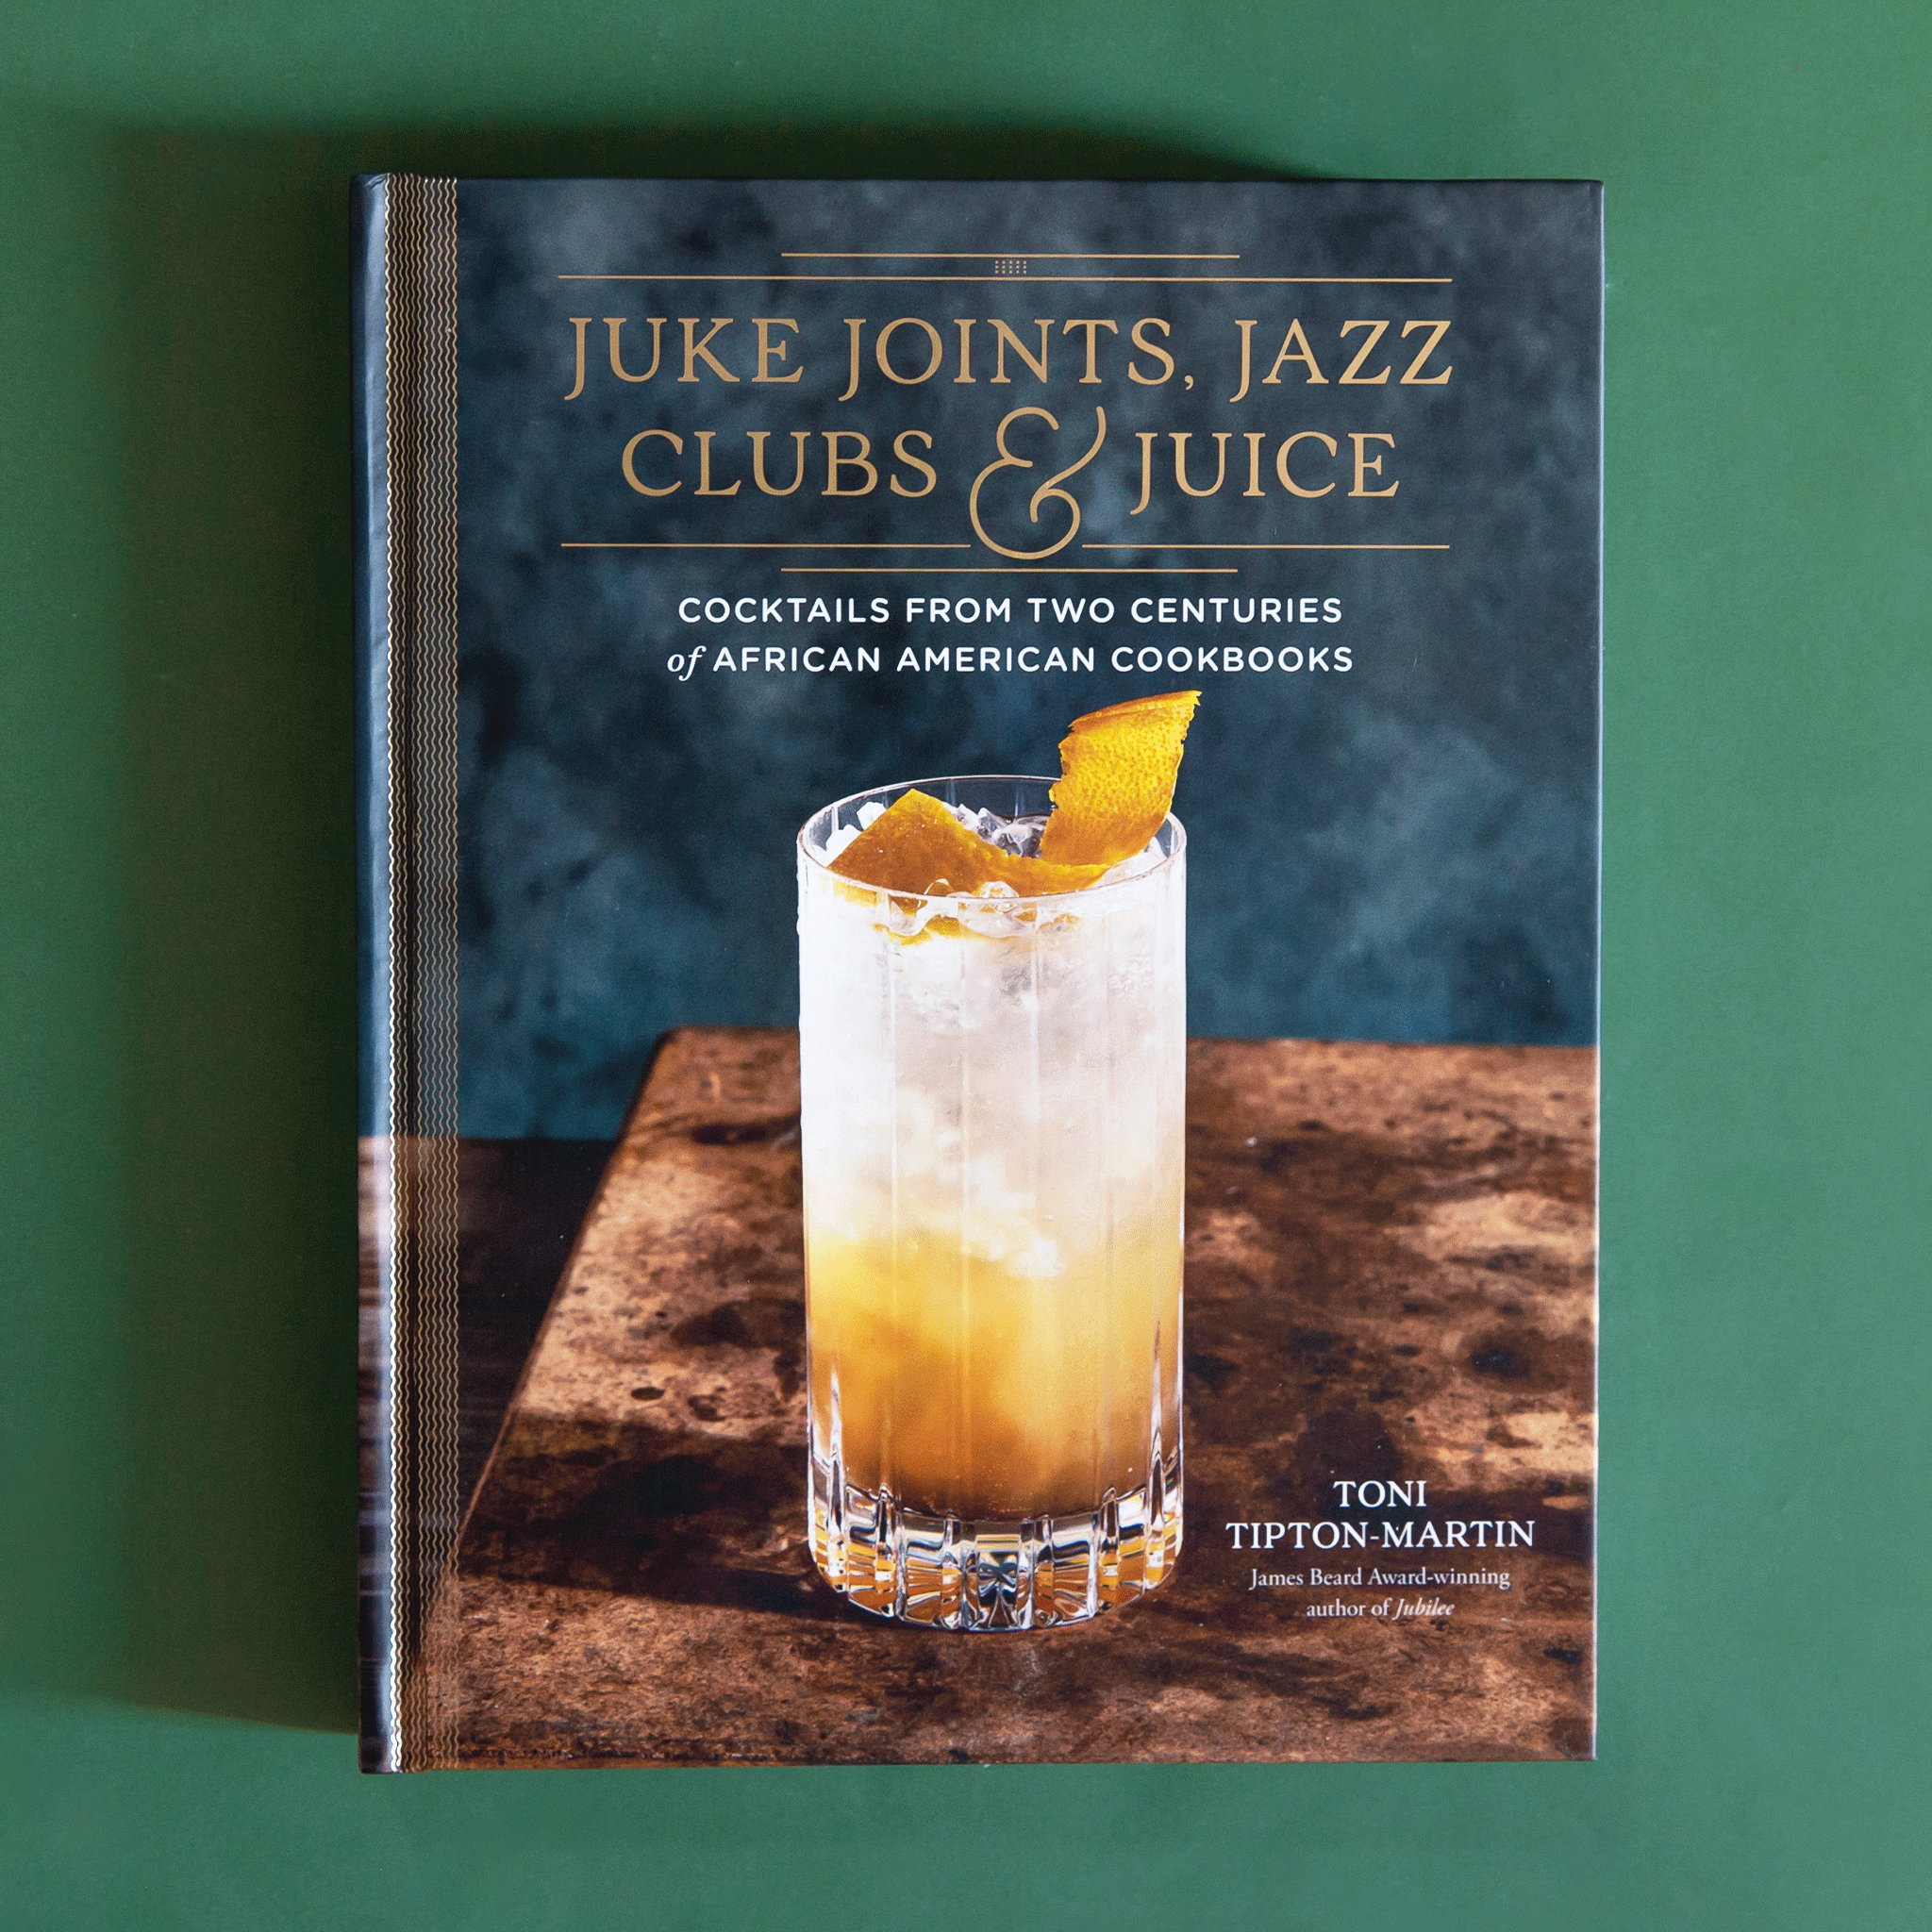 On a green background is a grey and brown book cover with a yellow cocktail and gold text that reads, &quot;Juke Joints, Jazz Clubs &amp; Juice&quot;, &quot;Cocktails From Two Centuries of African American Cookbooks&quot;.